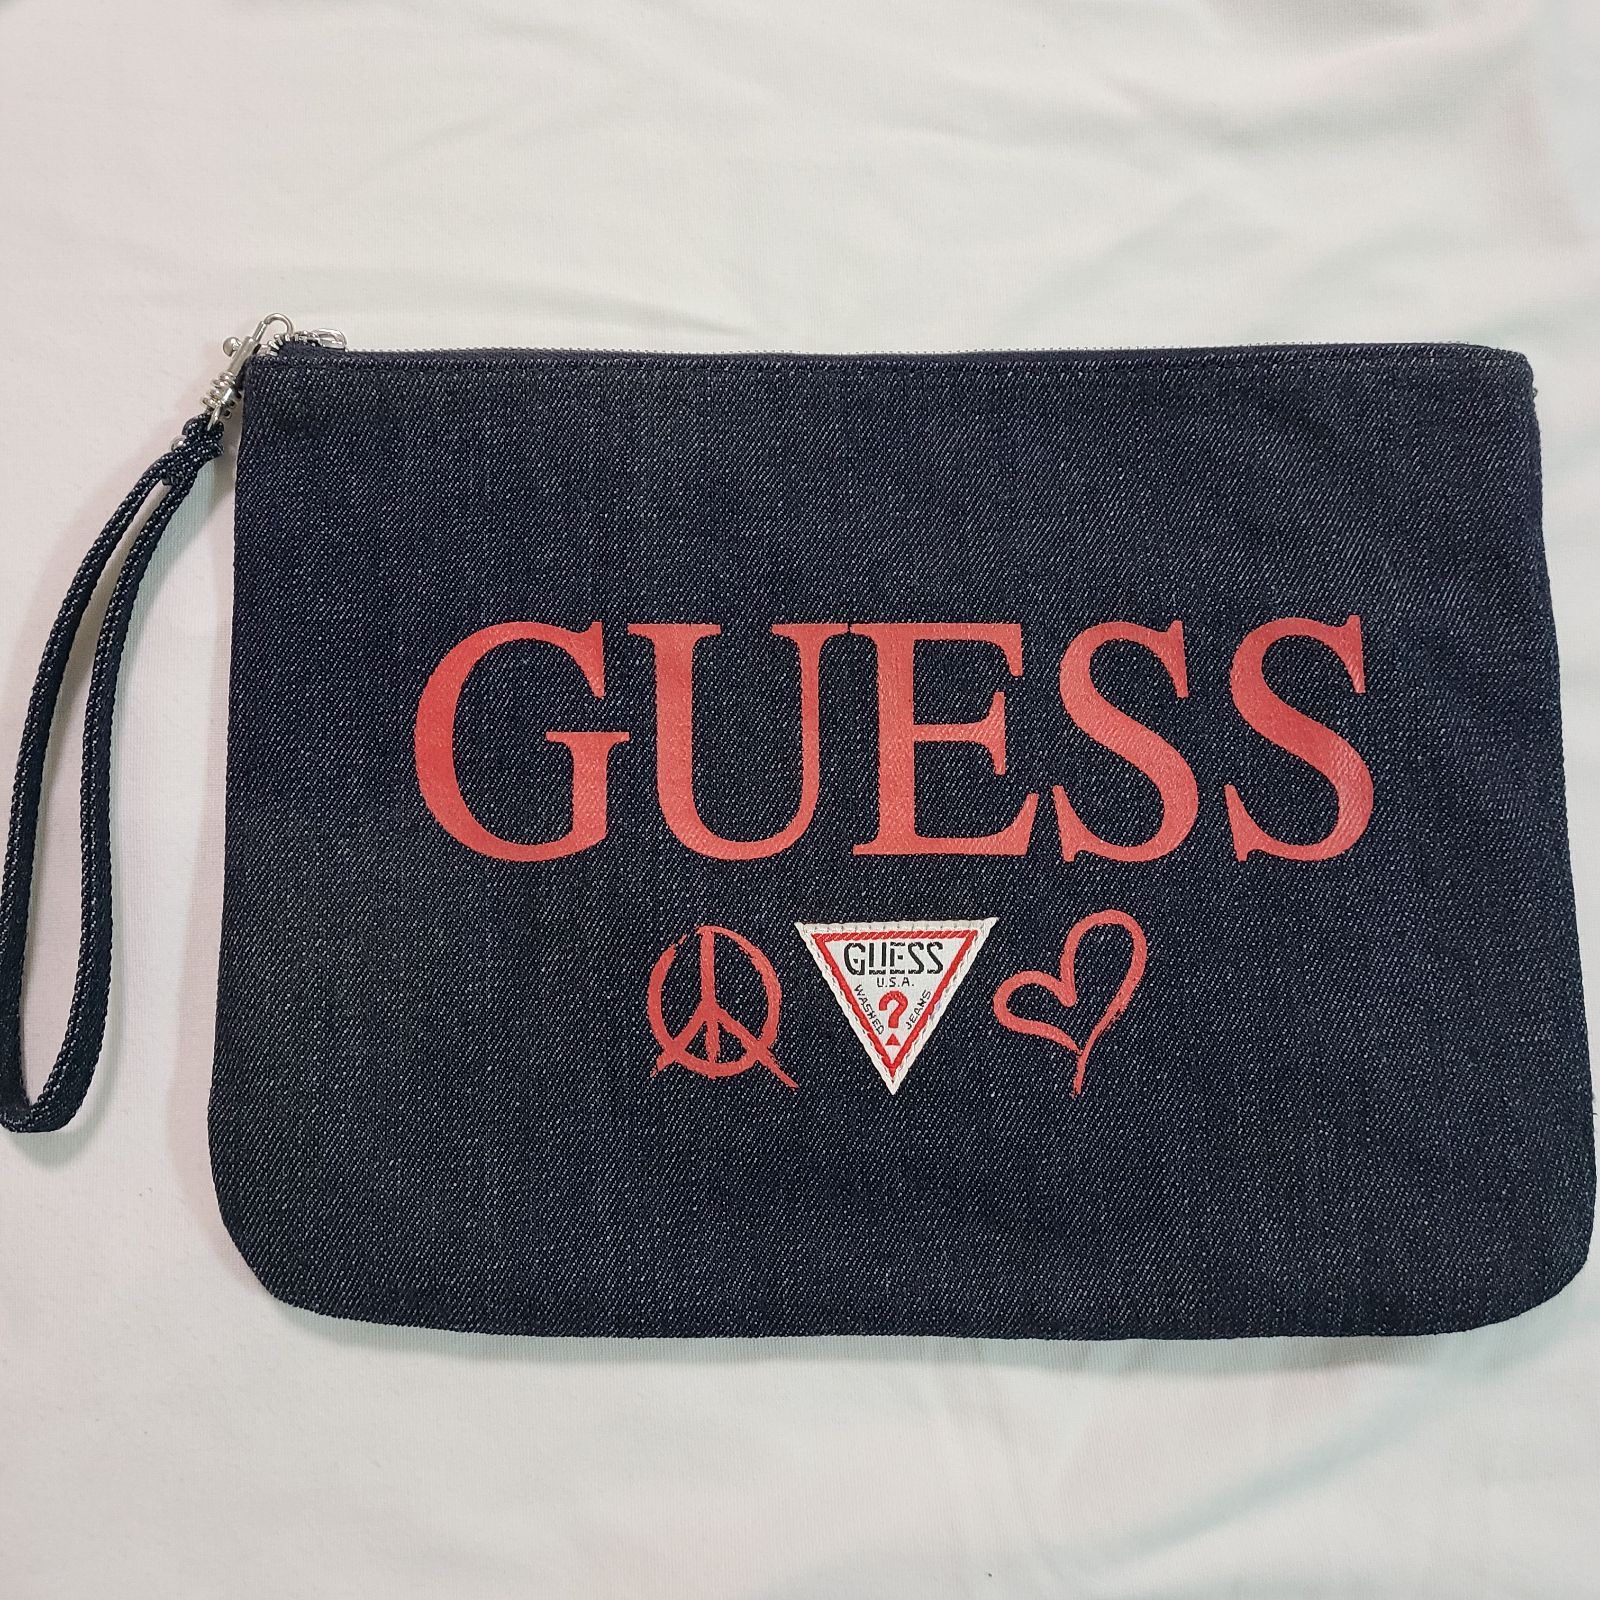 GUESS クラッチバッグ